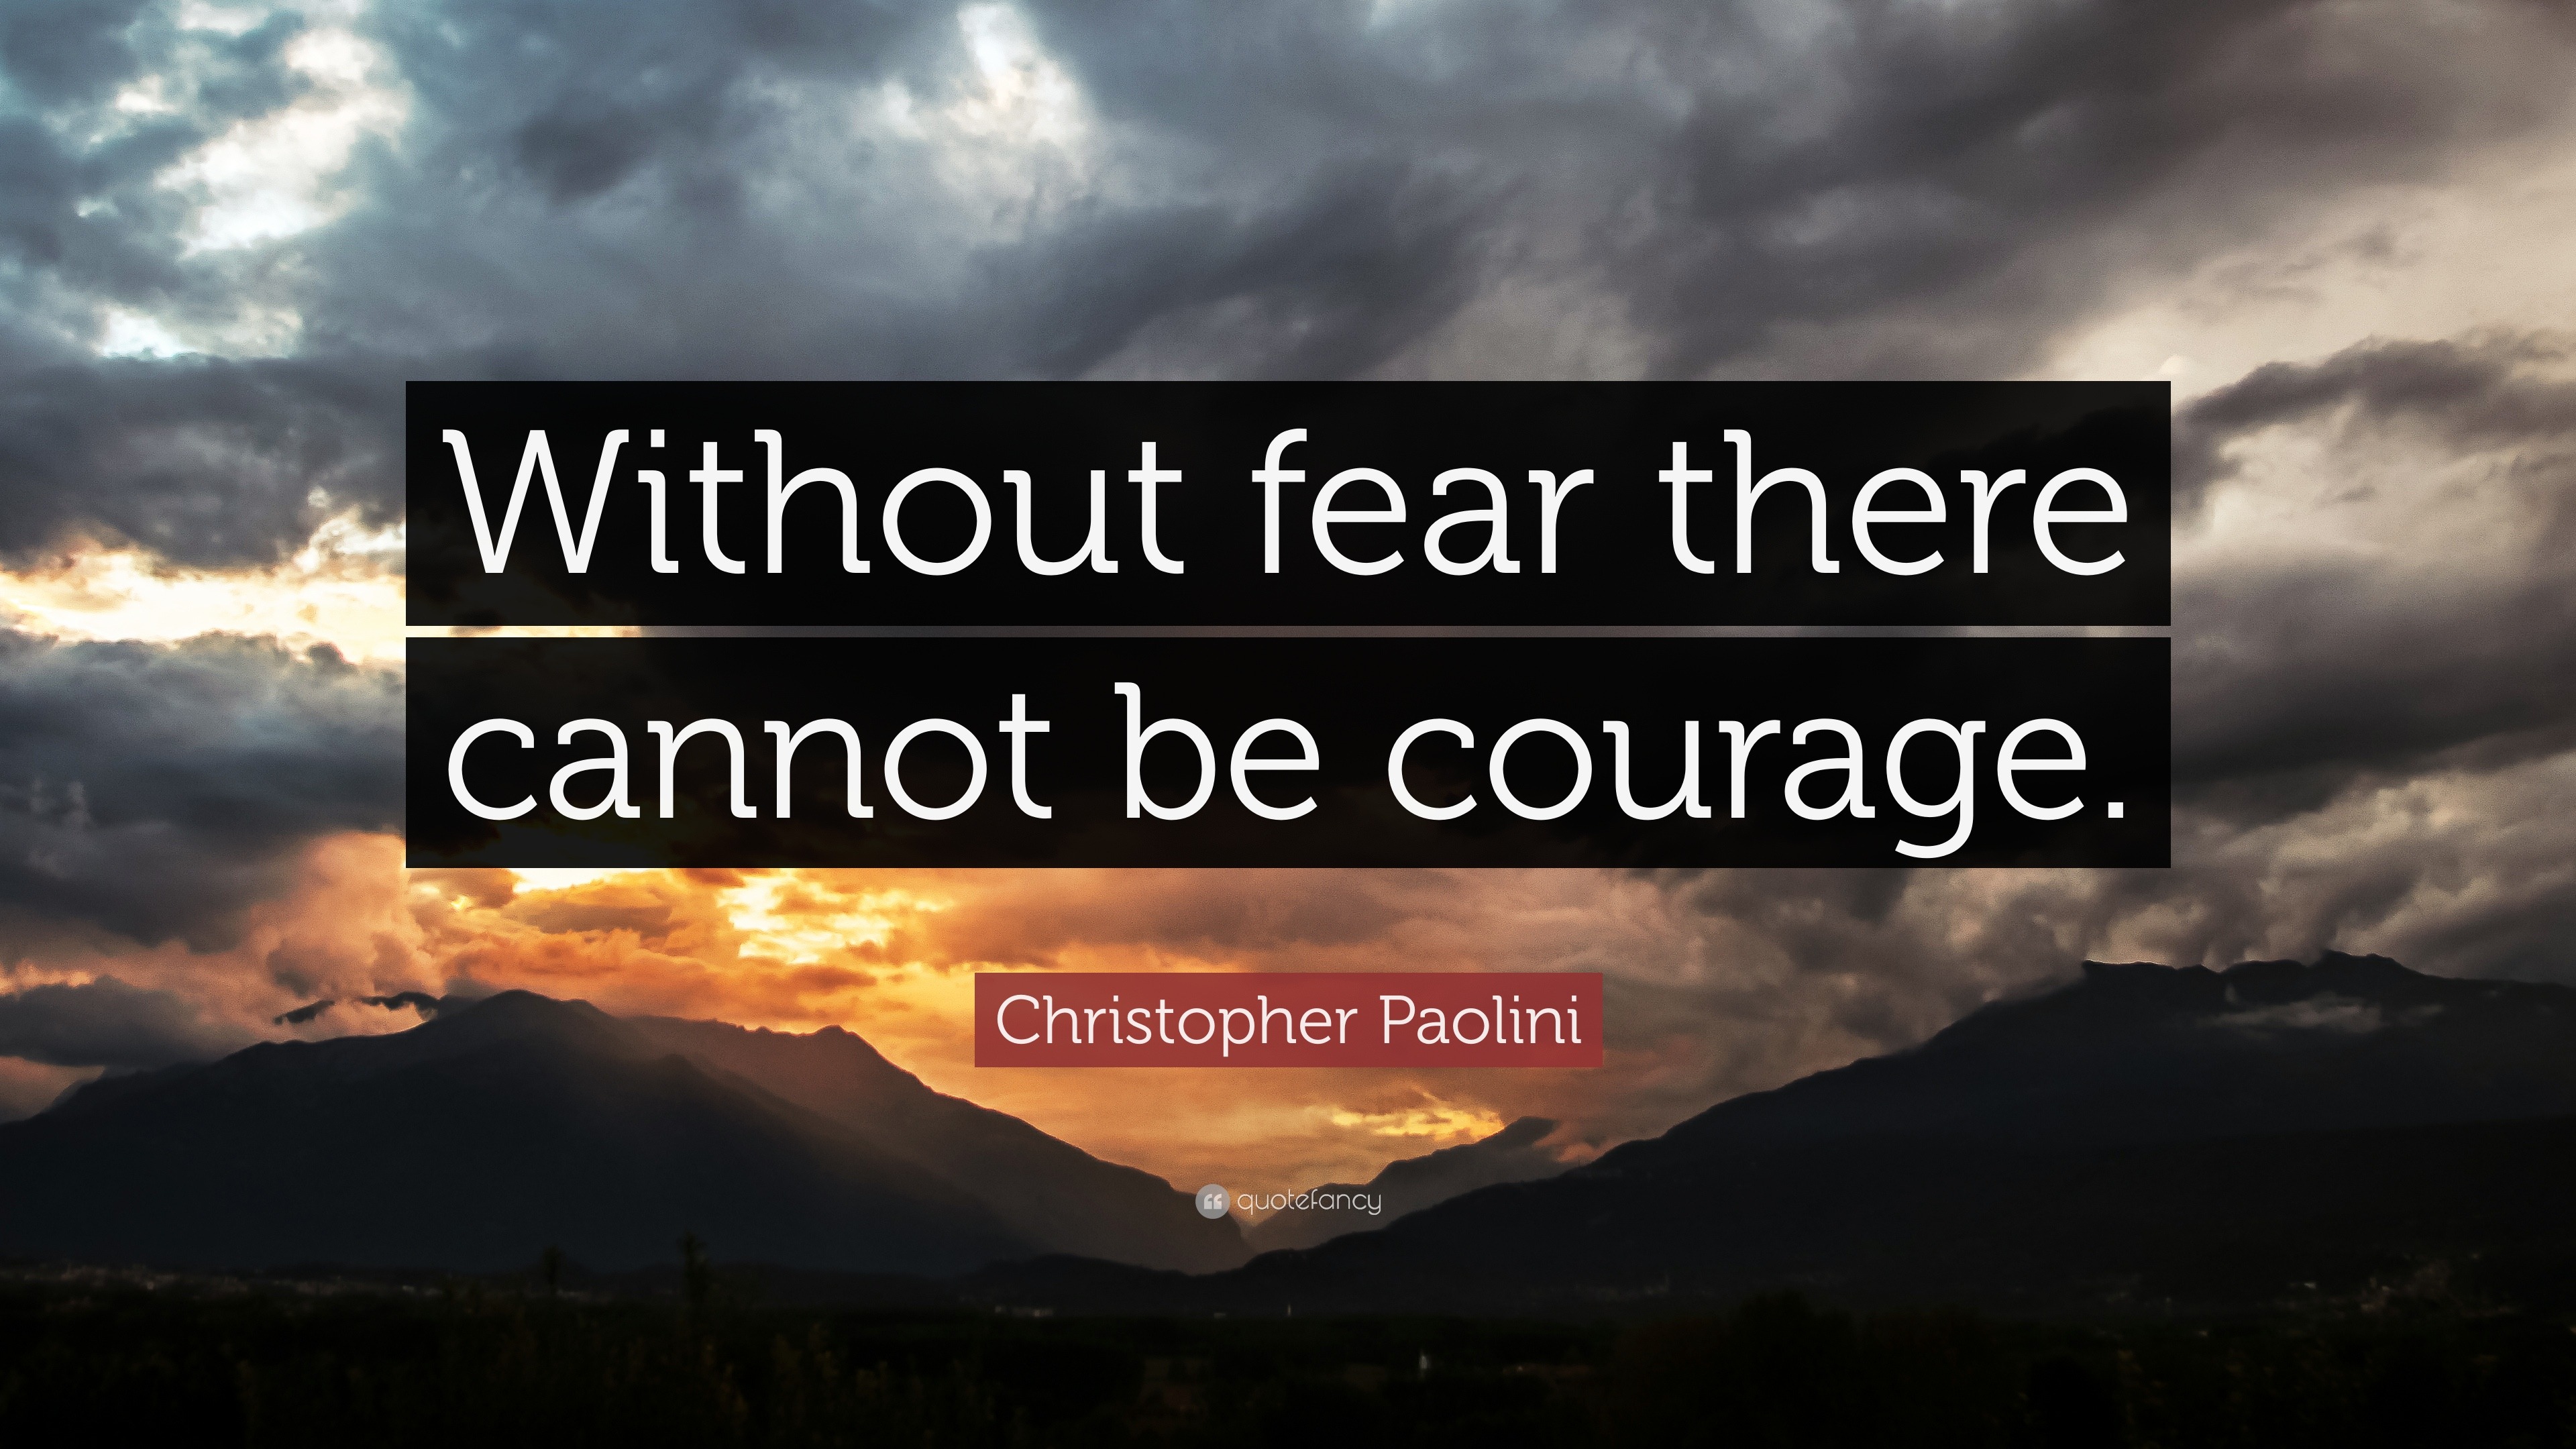 Courage Quotes “Without fear there cannot be courage ” — Christopher Paolini